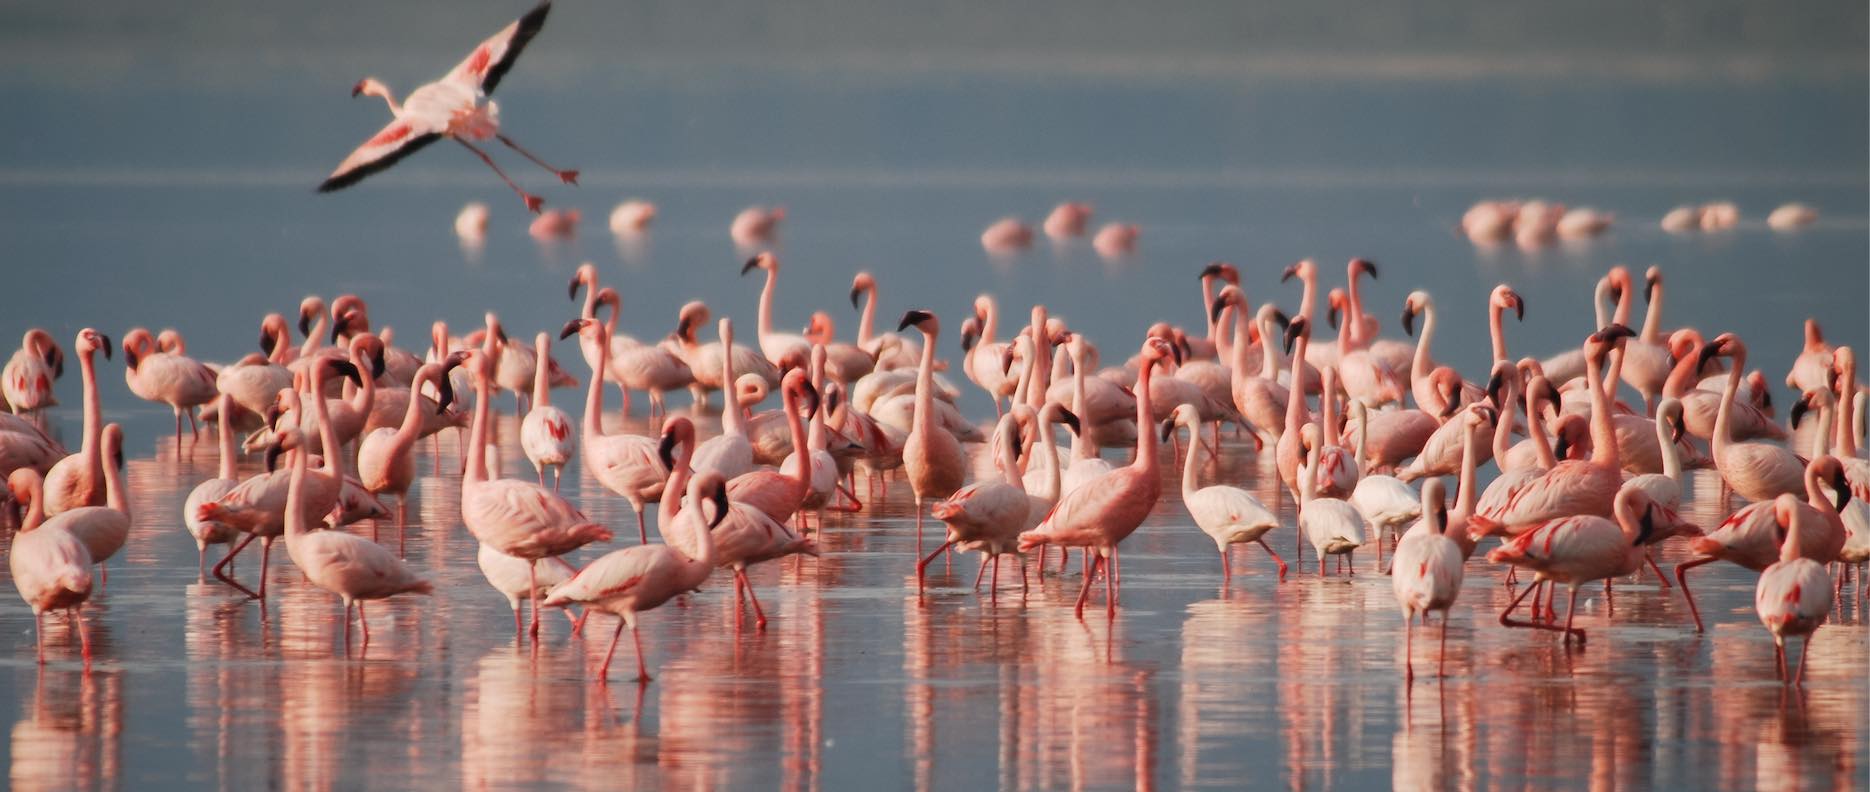 Flamingos-banner-free-from-Pixabay